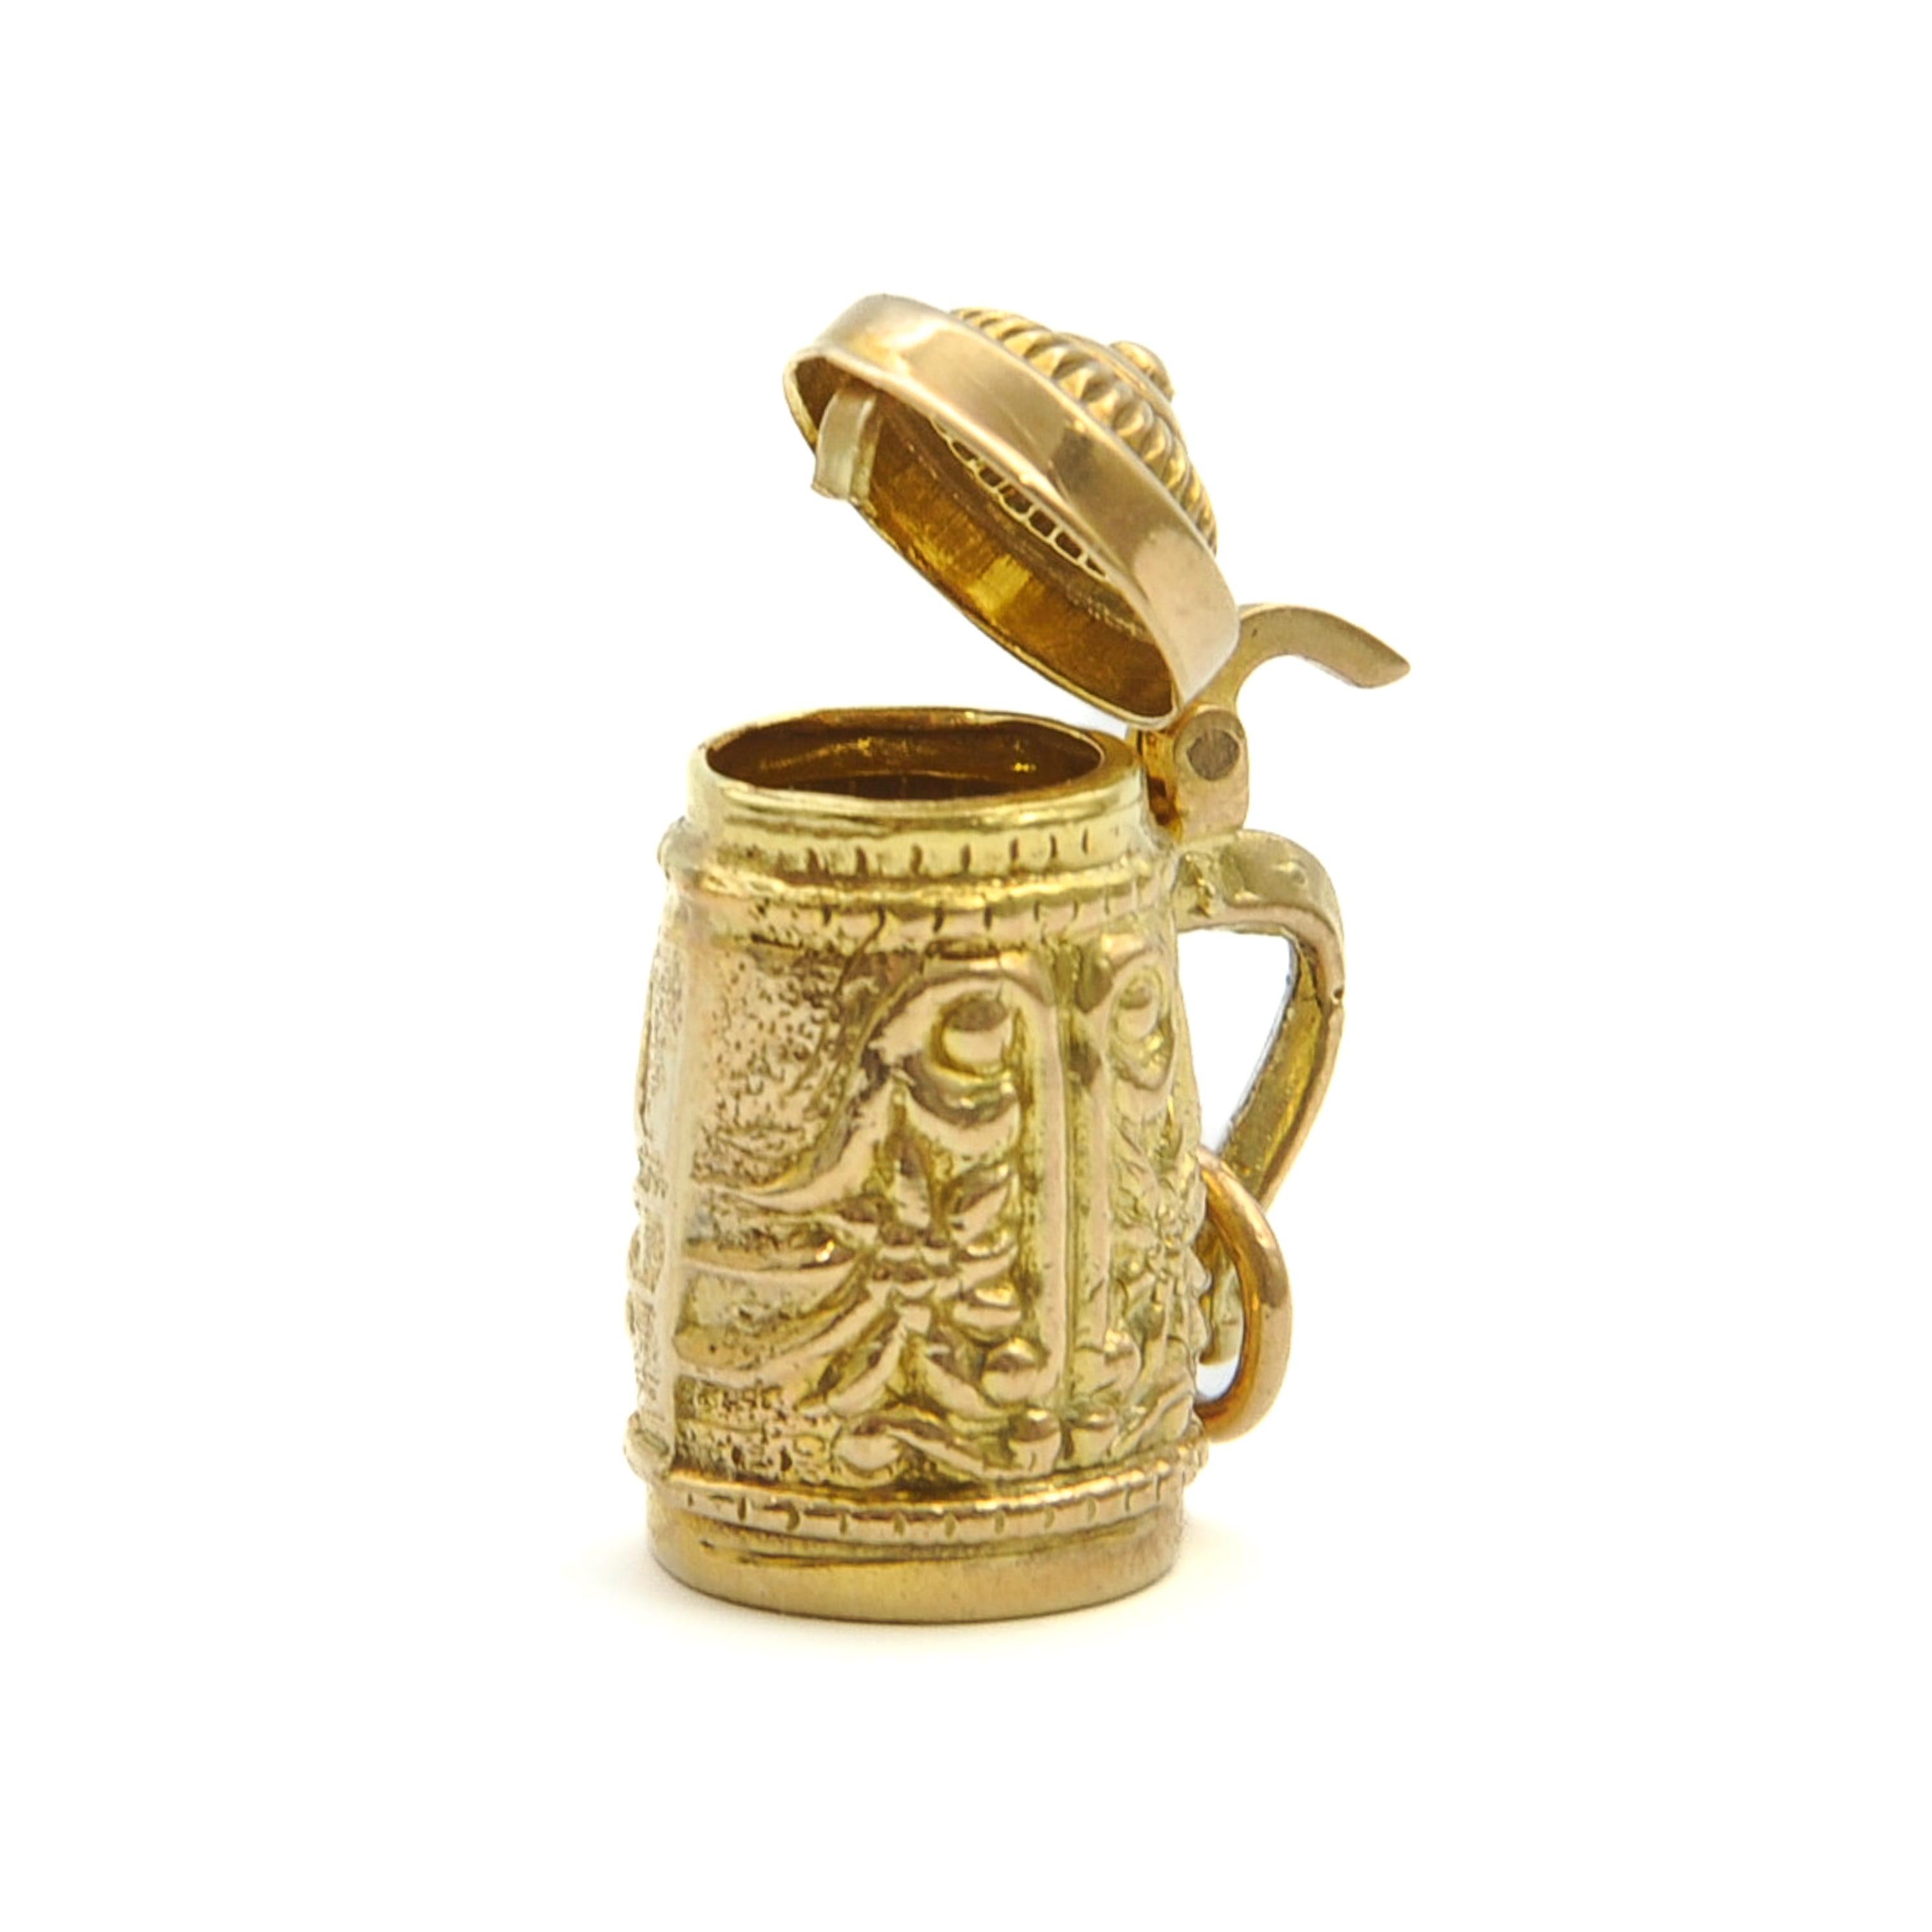 Vintage 9K Gold Engraved Edelweiss Beer Stein Mug Charm Pendant In Good Condition For Sale In Rotterdam, NL